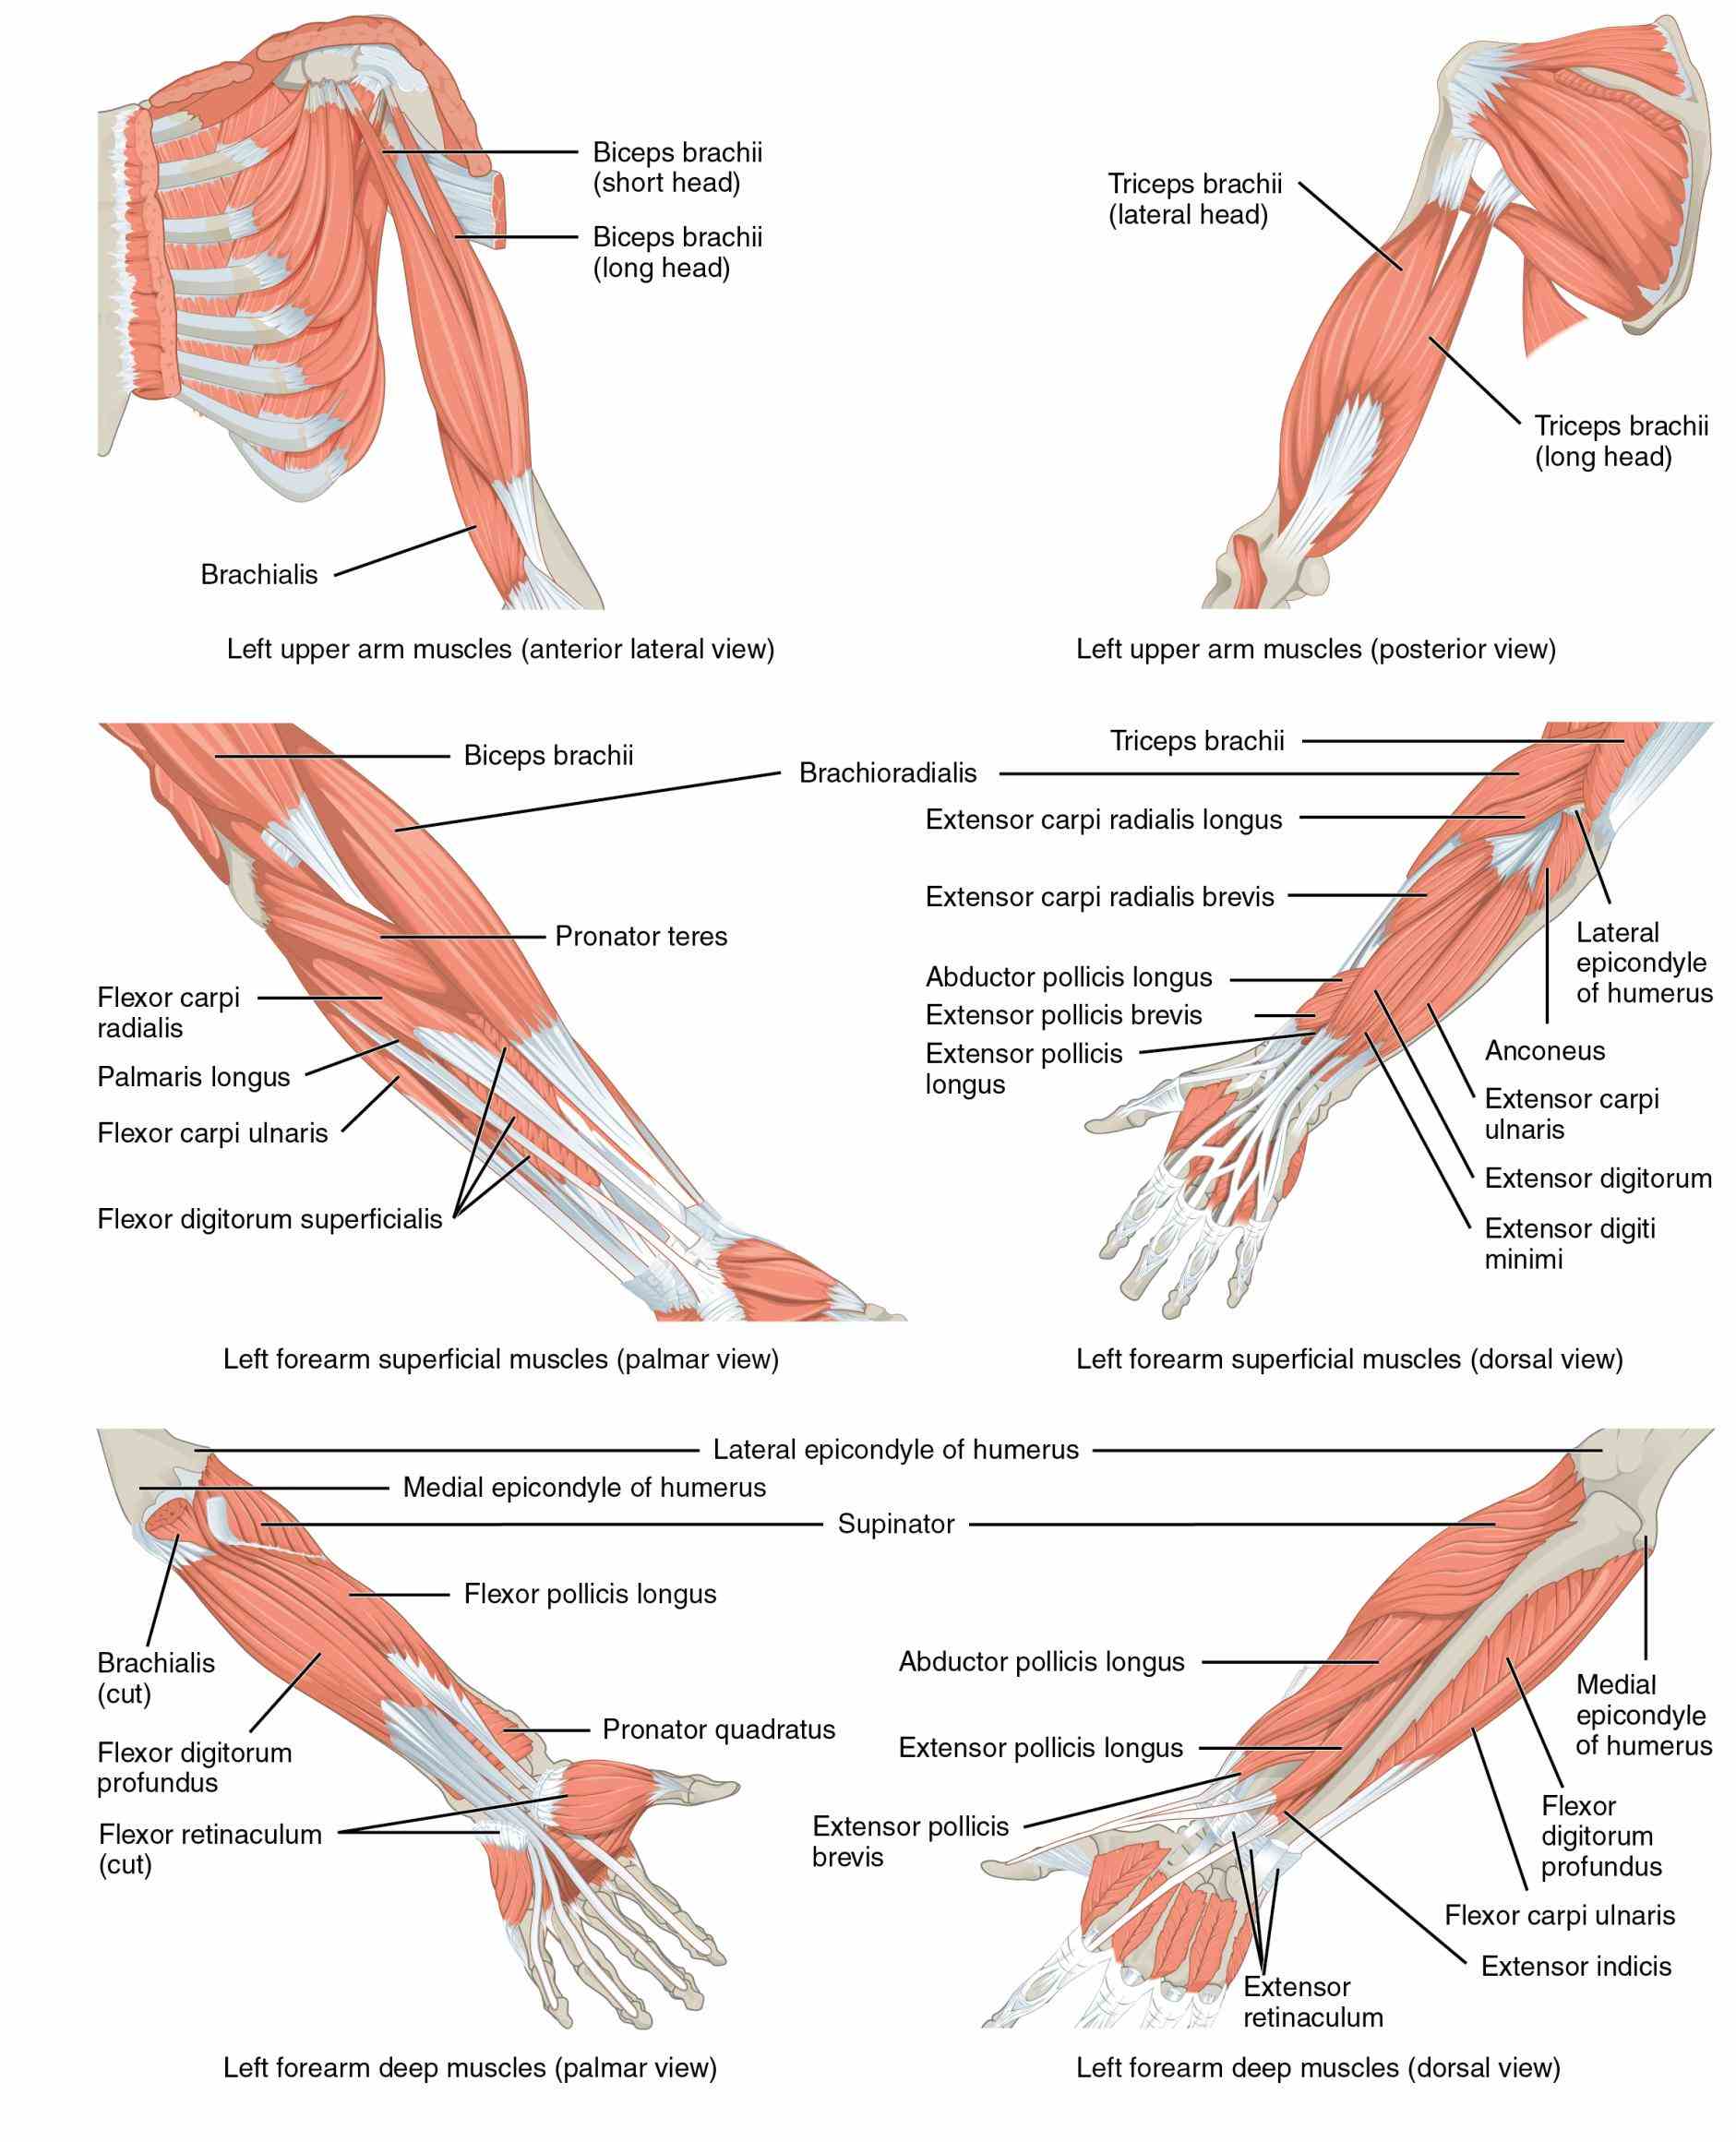 or pectoral is set of bones which connects arm to consists five muscles that attach clavicle and scapula allow